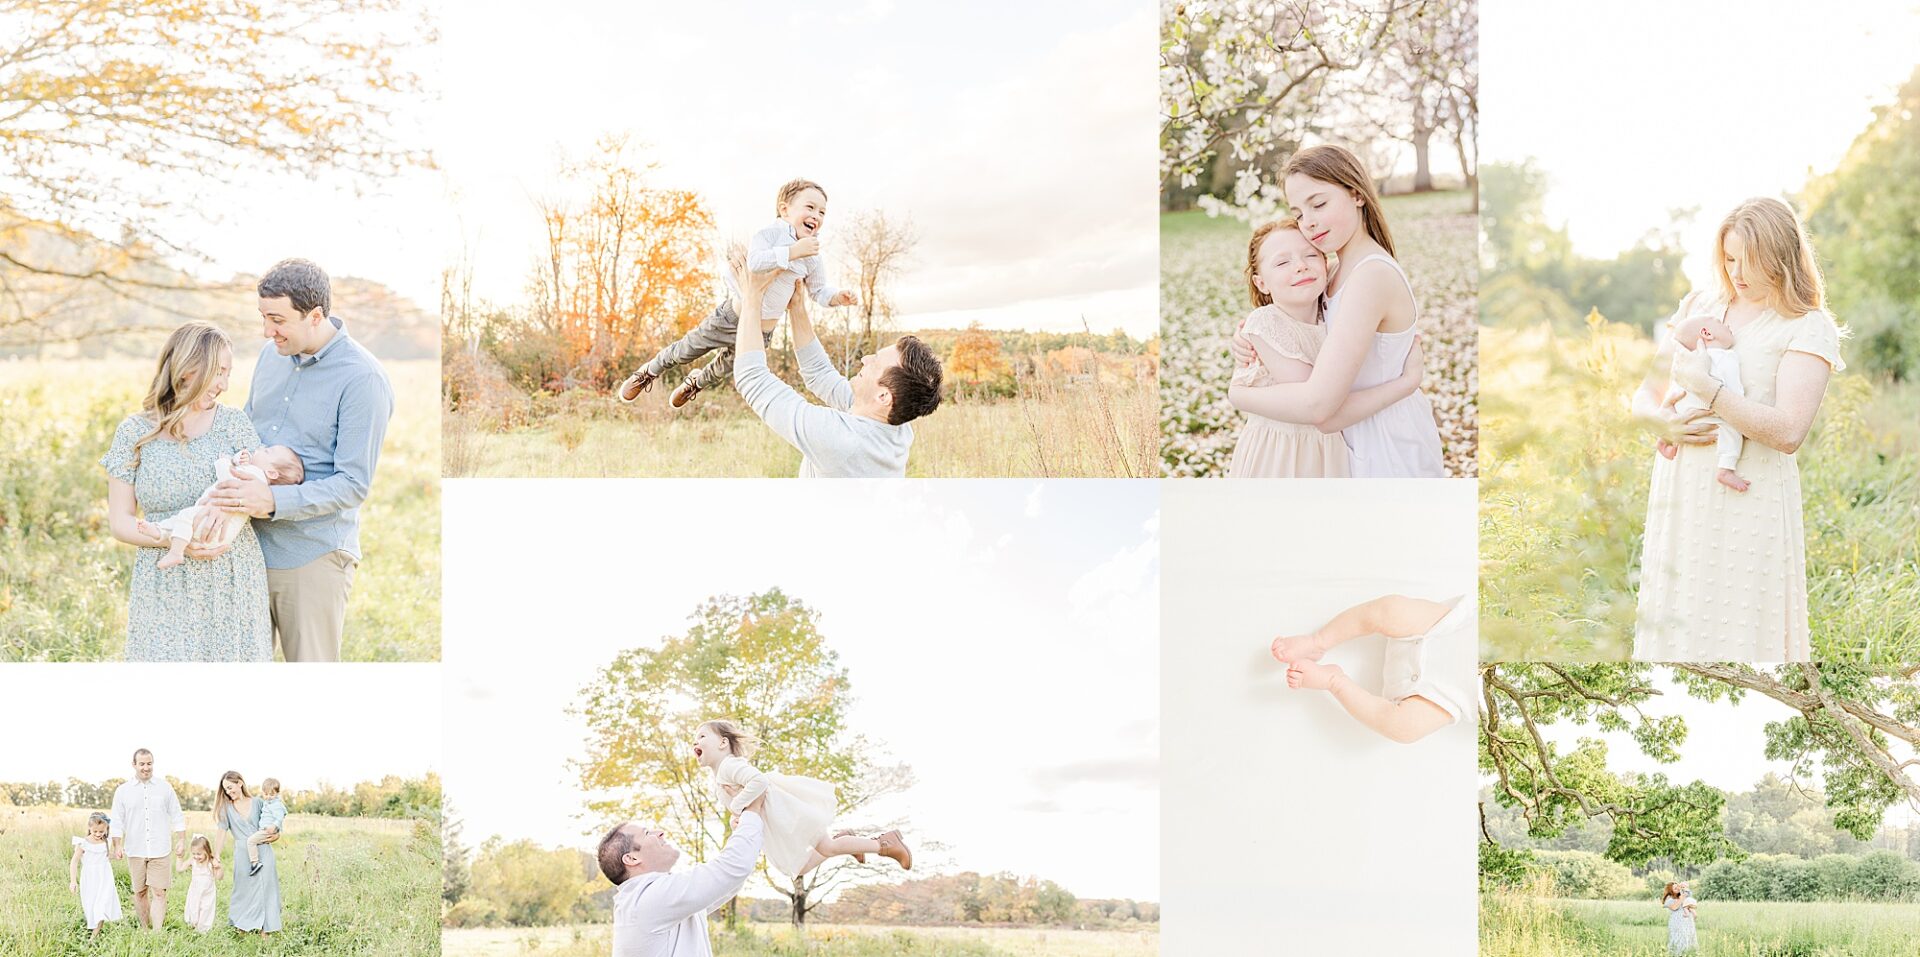 Light and Bright metro west boston family photo sessions by Sara Sniderman Photography